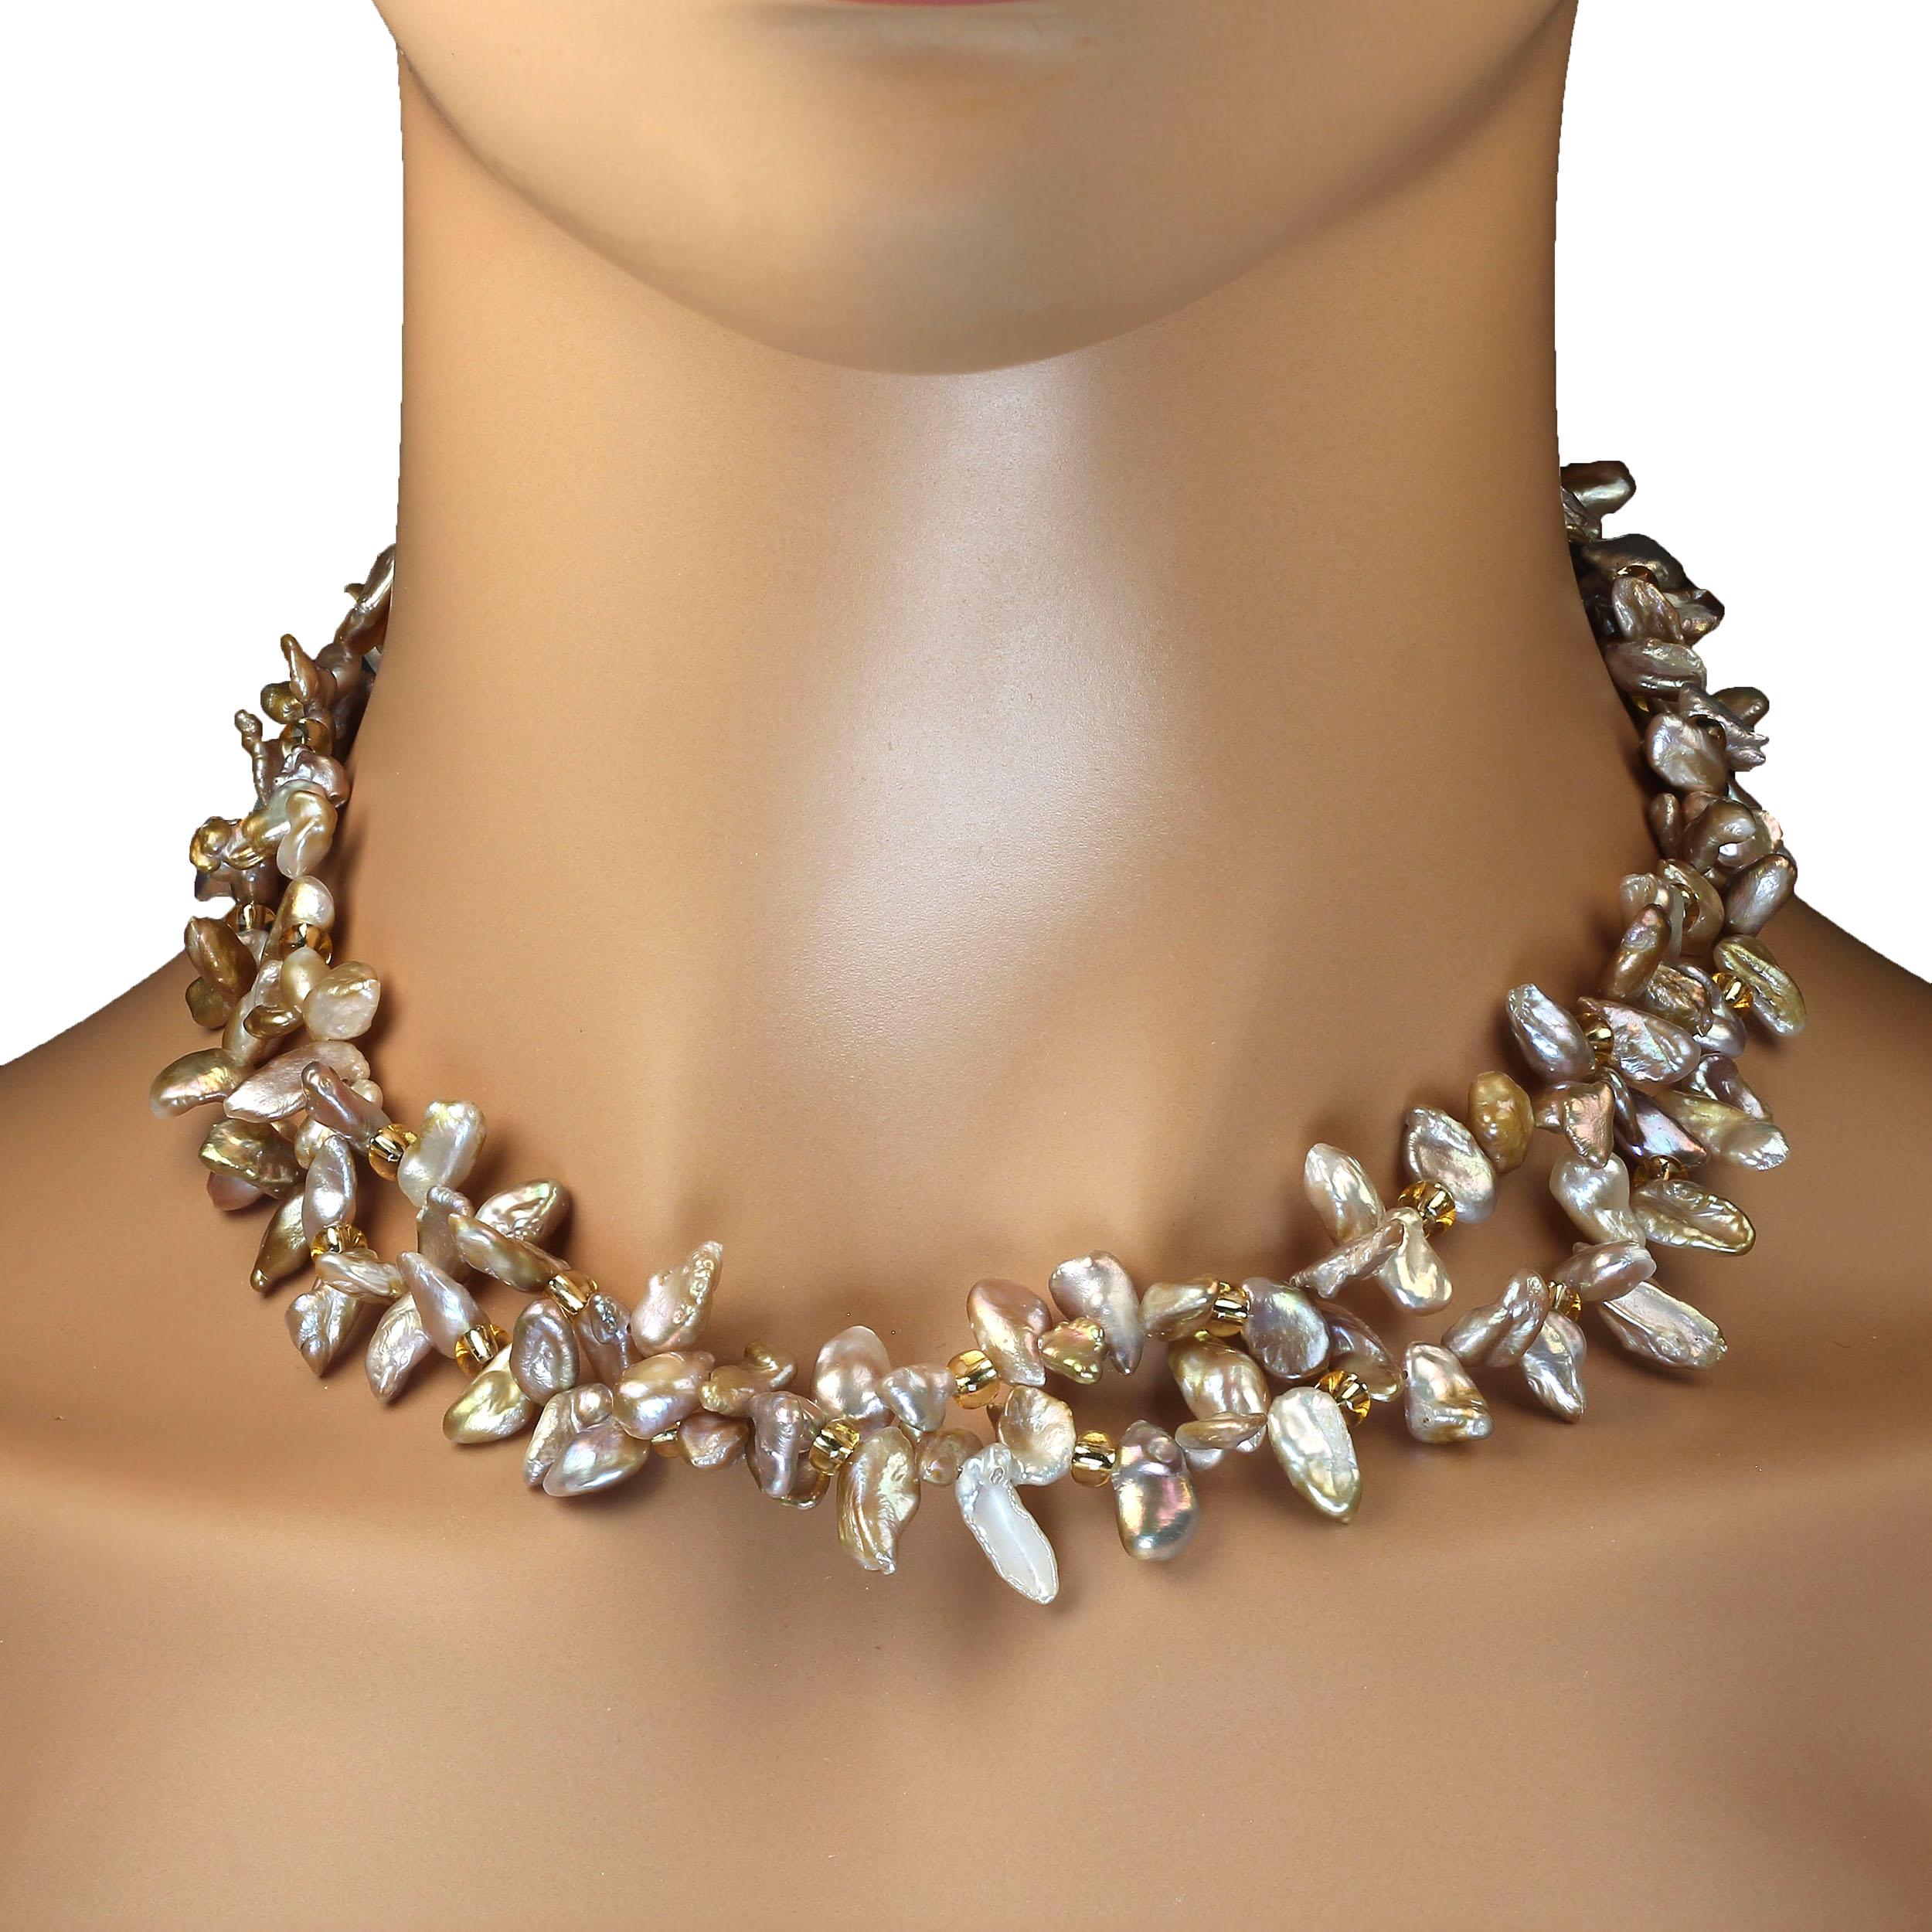 'Put on your Pearls Girls' Lulu Guinness
Unique 17 inch necklace of two strands of free form Pearls in lustrous shades of goldy-gray. These Chinese freshwater pearls are approximately 10 x 5 MM and accented with gold Czech beads. The necklace could